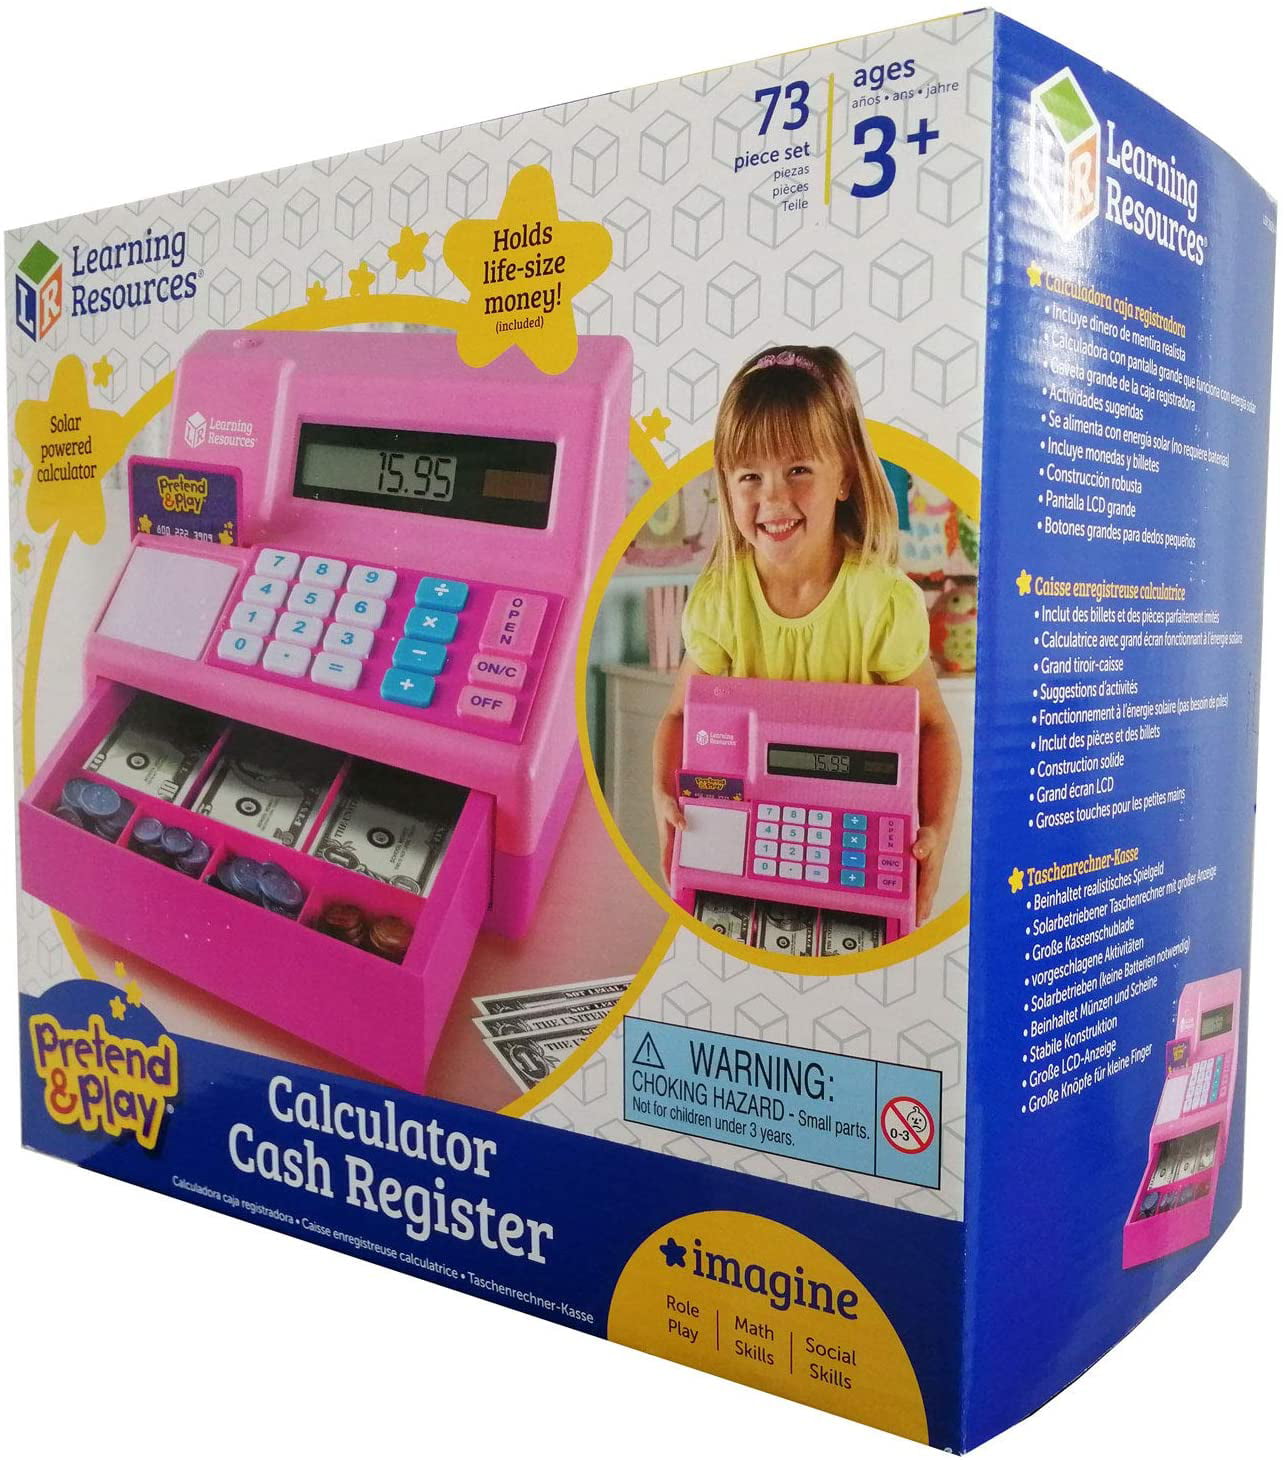 Classic Counting Cash Register Details about    Pretend & Play Calculator Cash Register Pink 